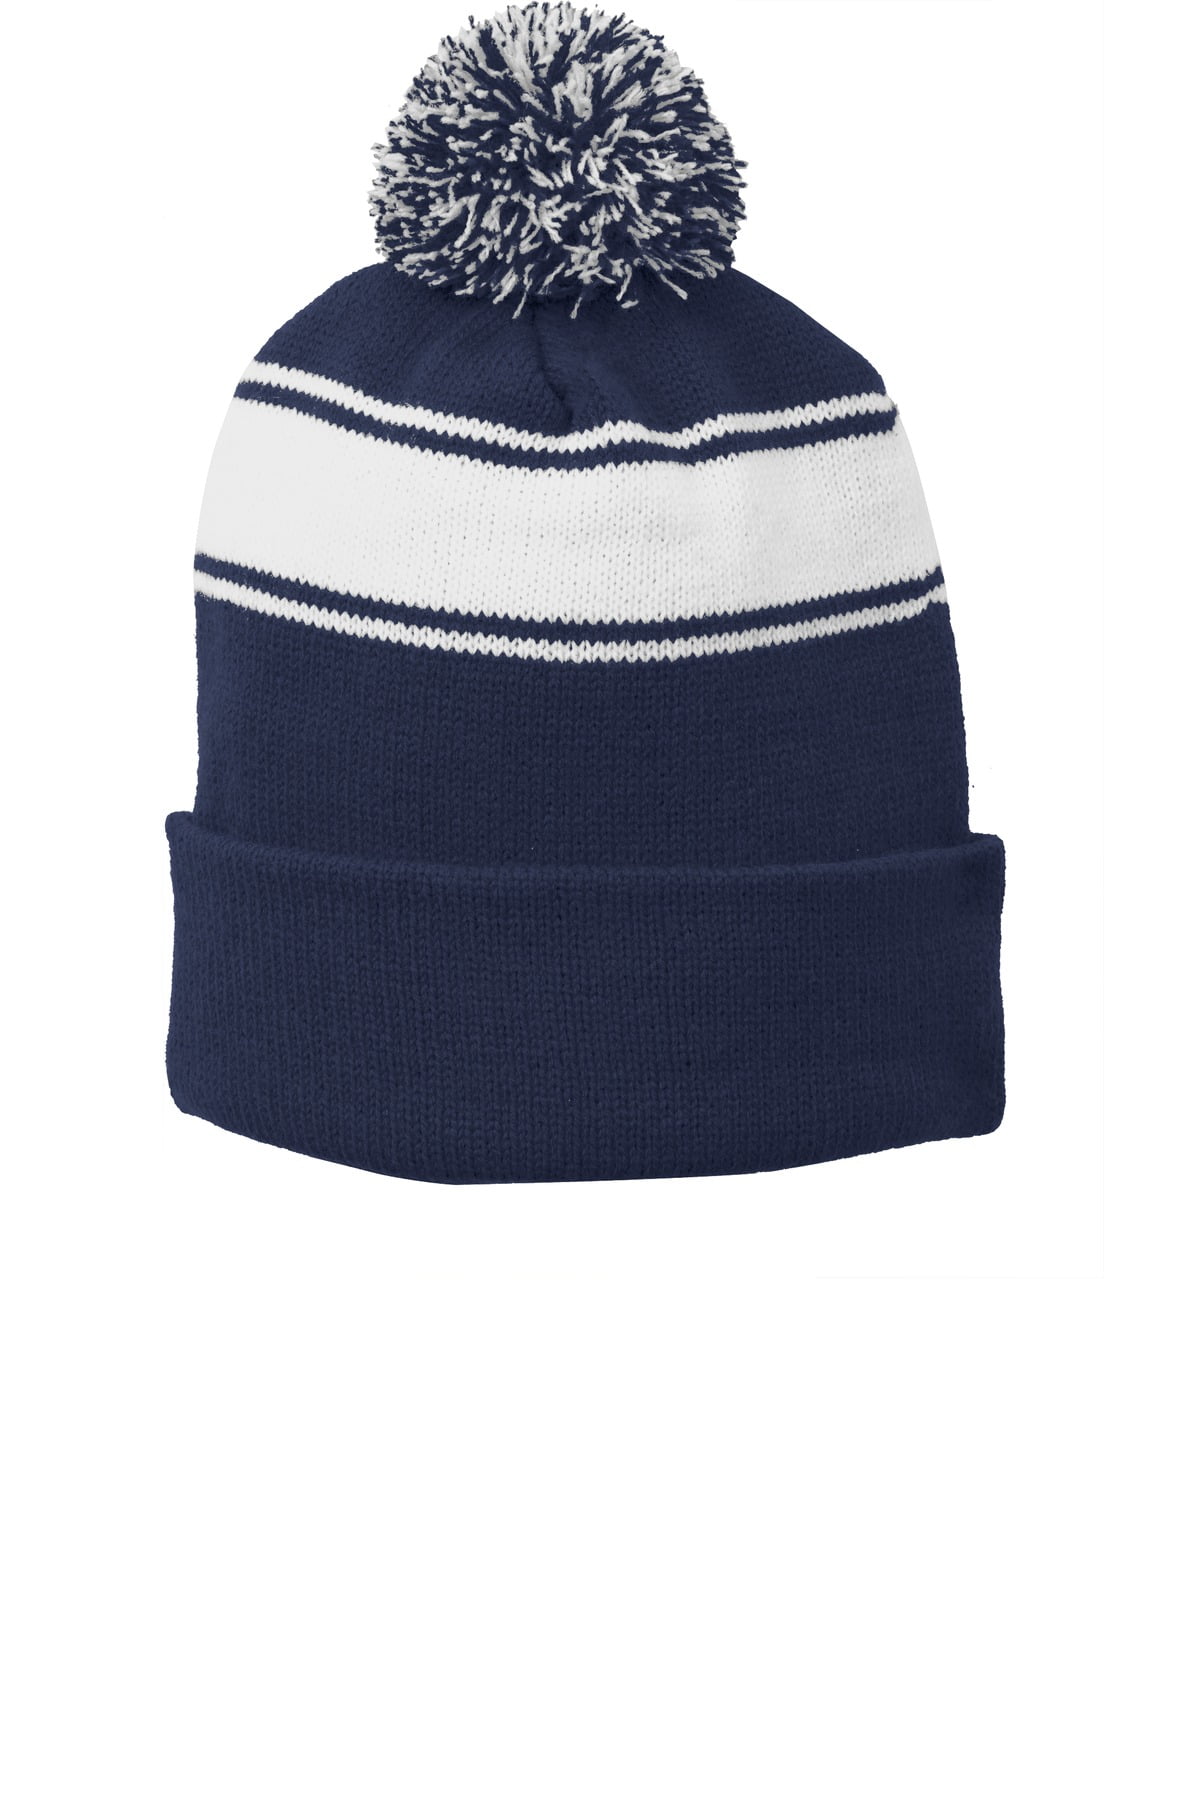 BlueRedWhite Blended Tri color Pom Beanie! Warm! New England Adult one size will easily stretch to fit most all Great Quality